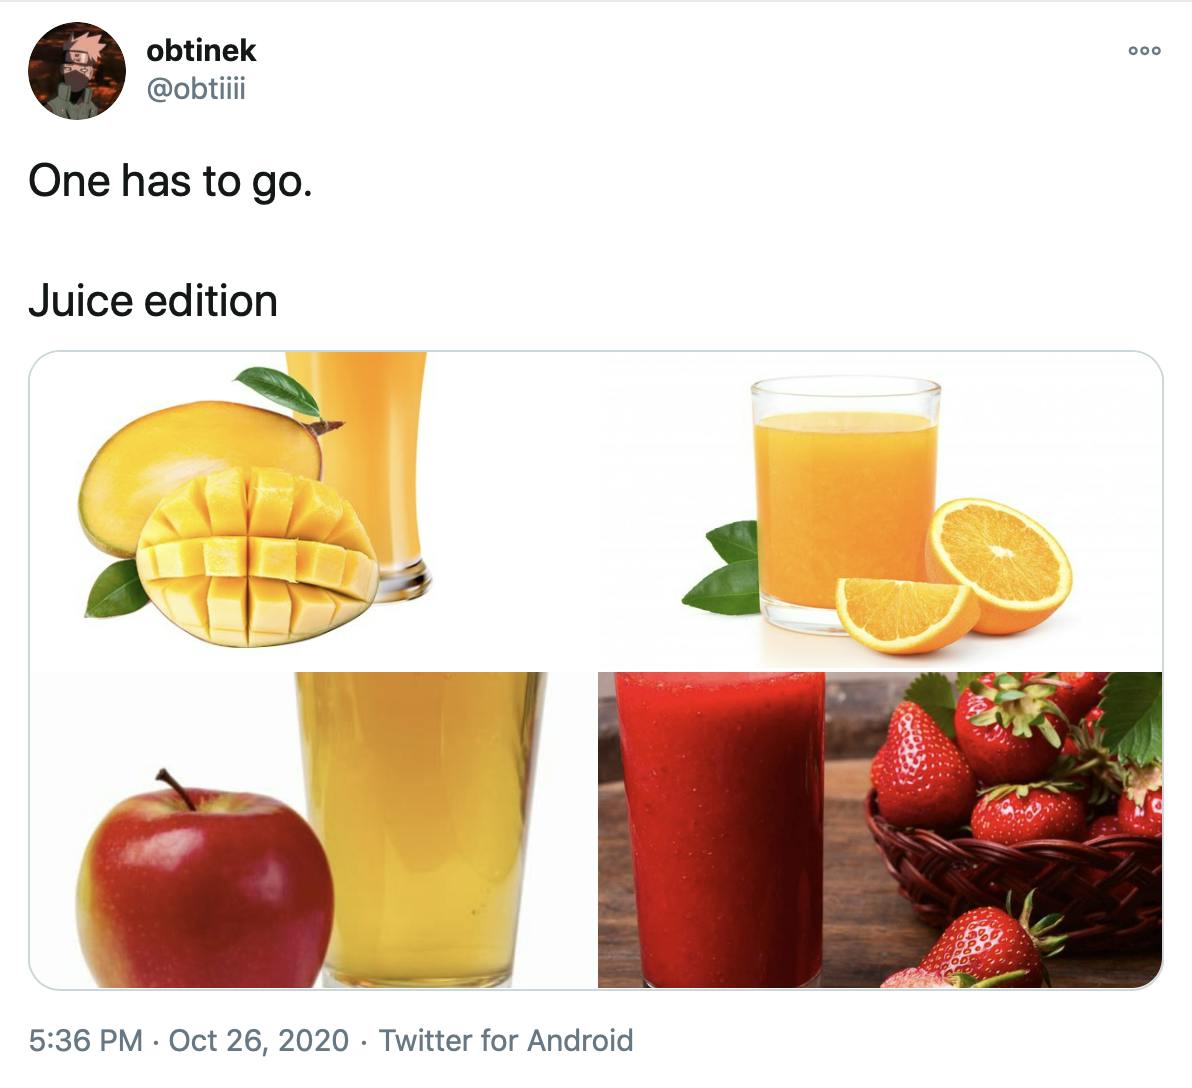 'One has to go. Juice edition' pictures of mango, orange, apples and strawberry juices in glasses next to the fruit in question